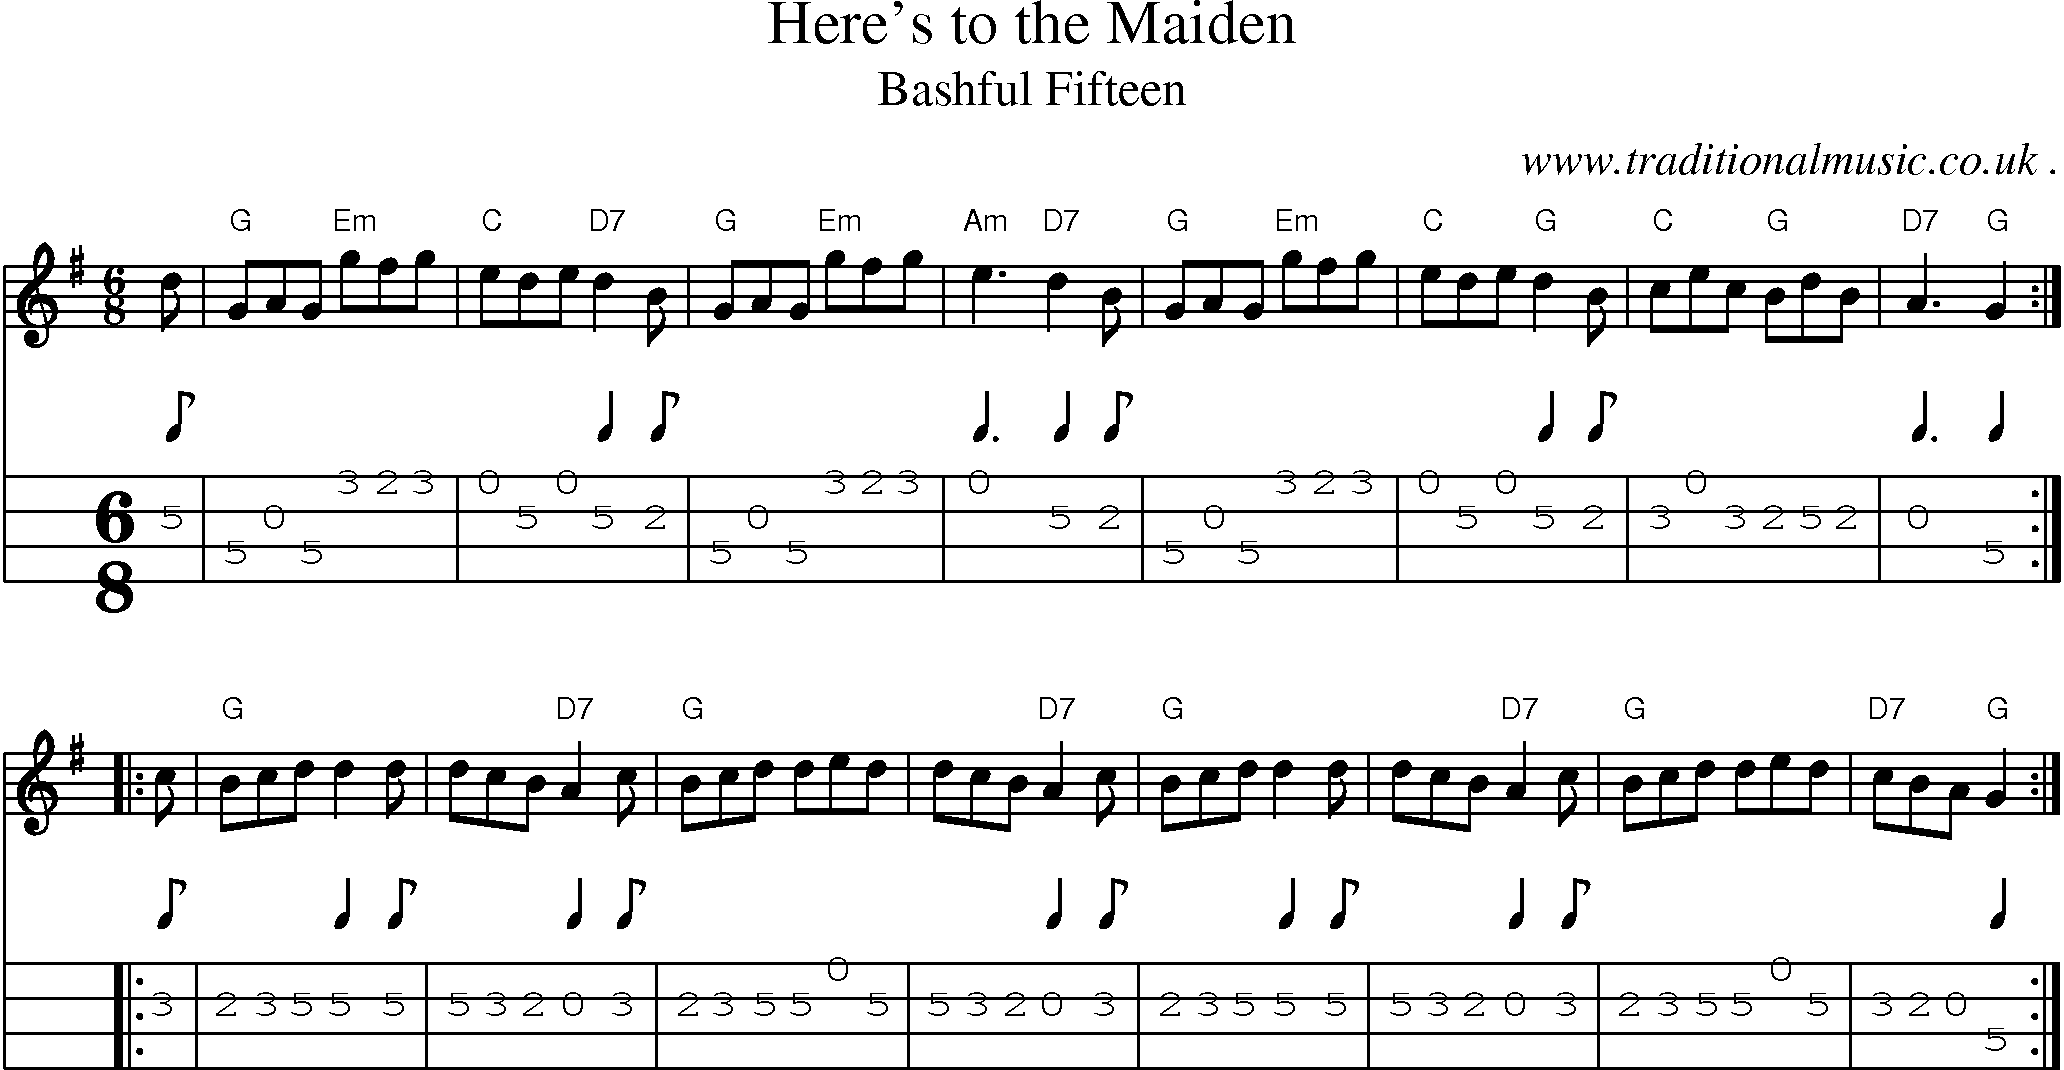 Sheet-music  score, Chords and Mandolin Tabs for Heres To The Maiden